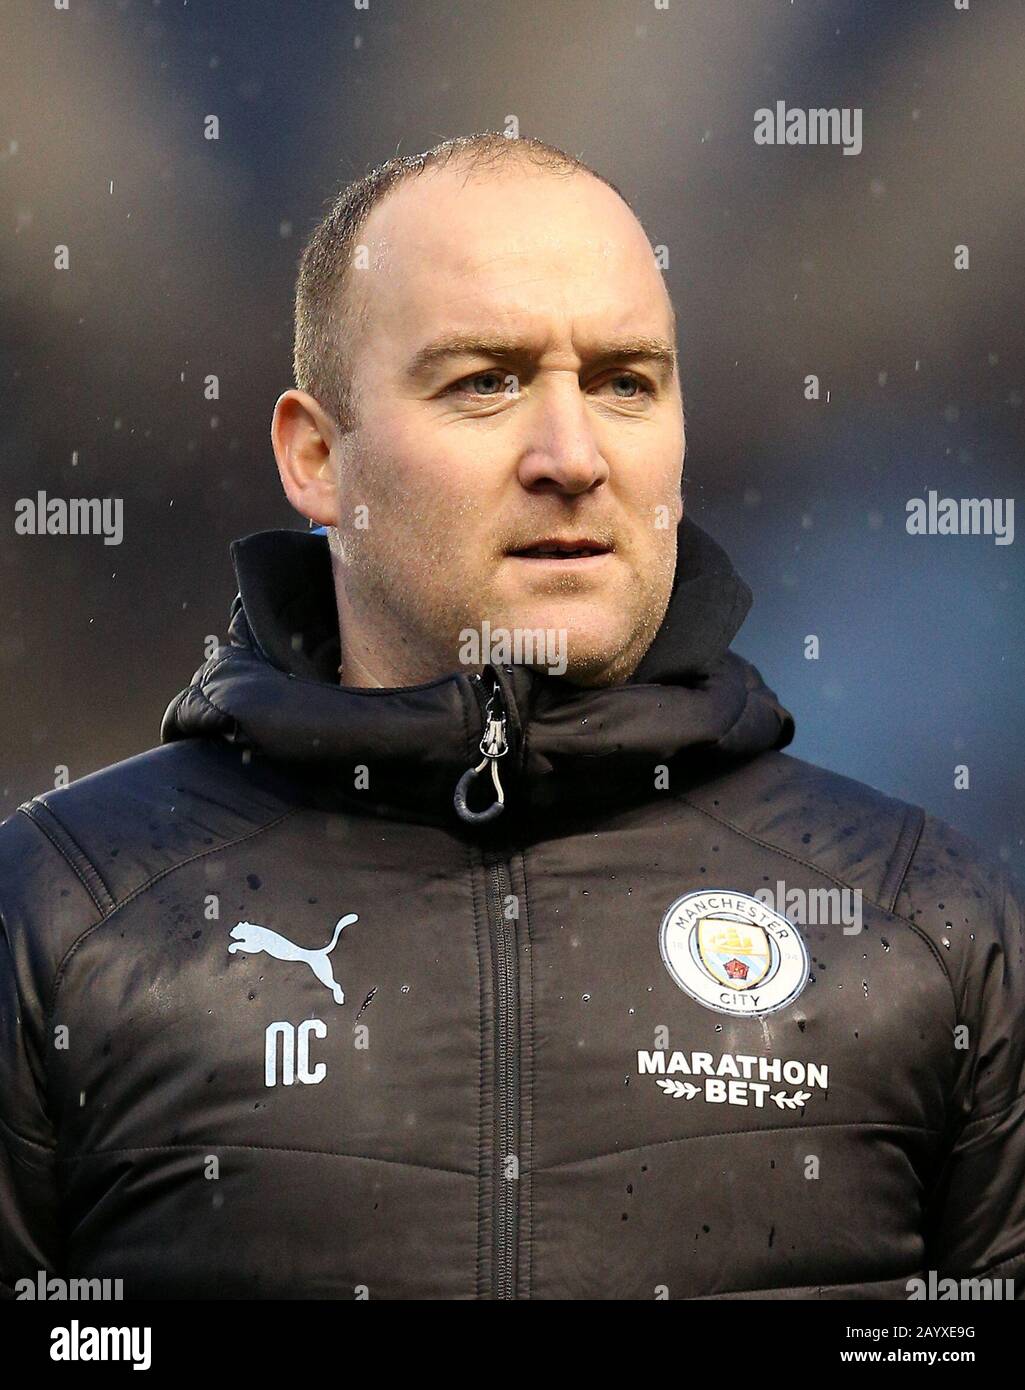 Manchester City manager Nick Cushing Stock Photo